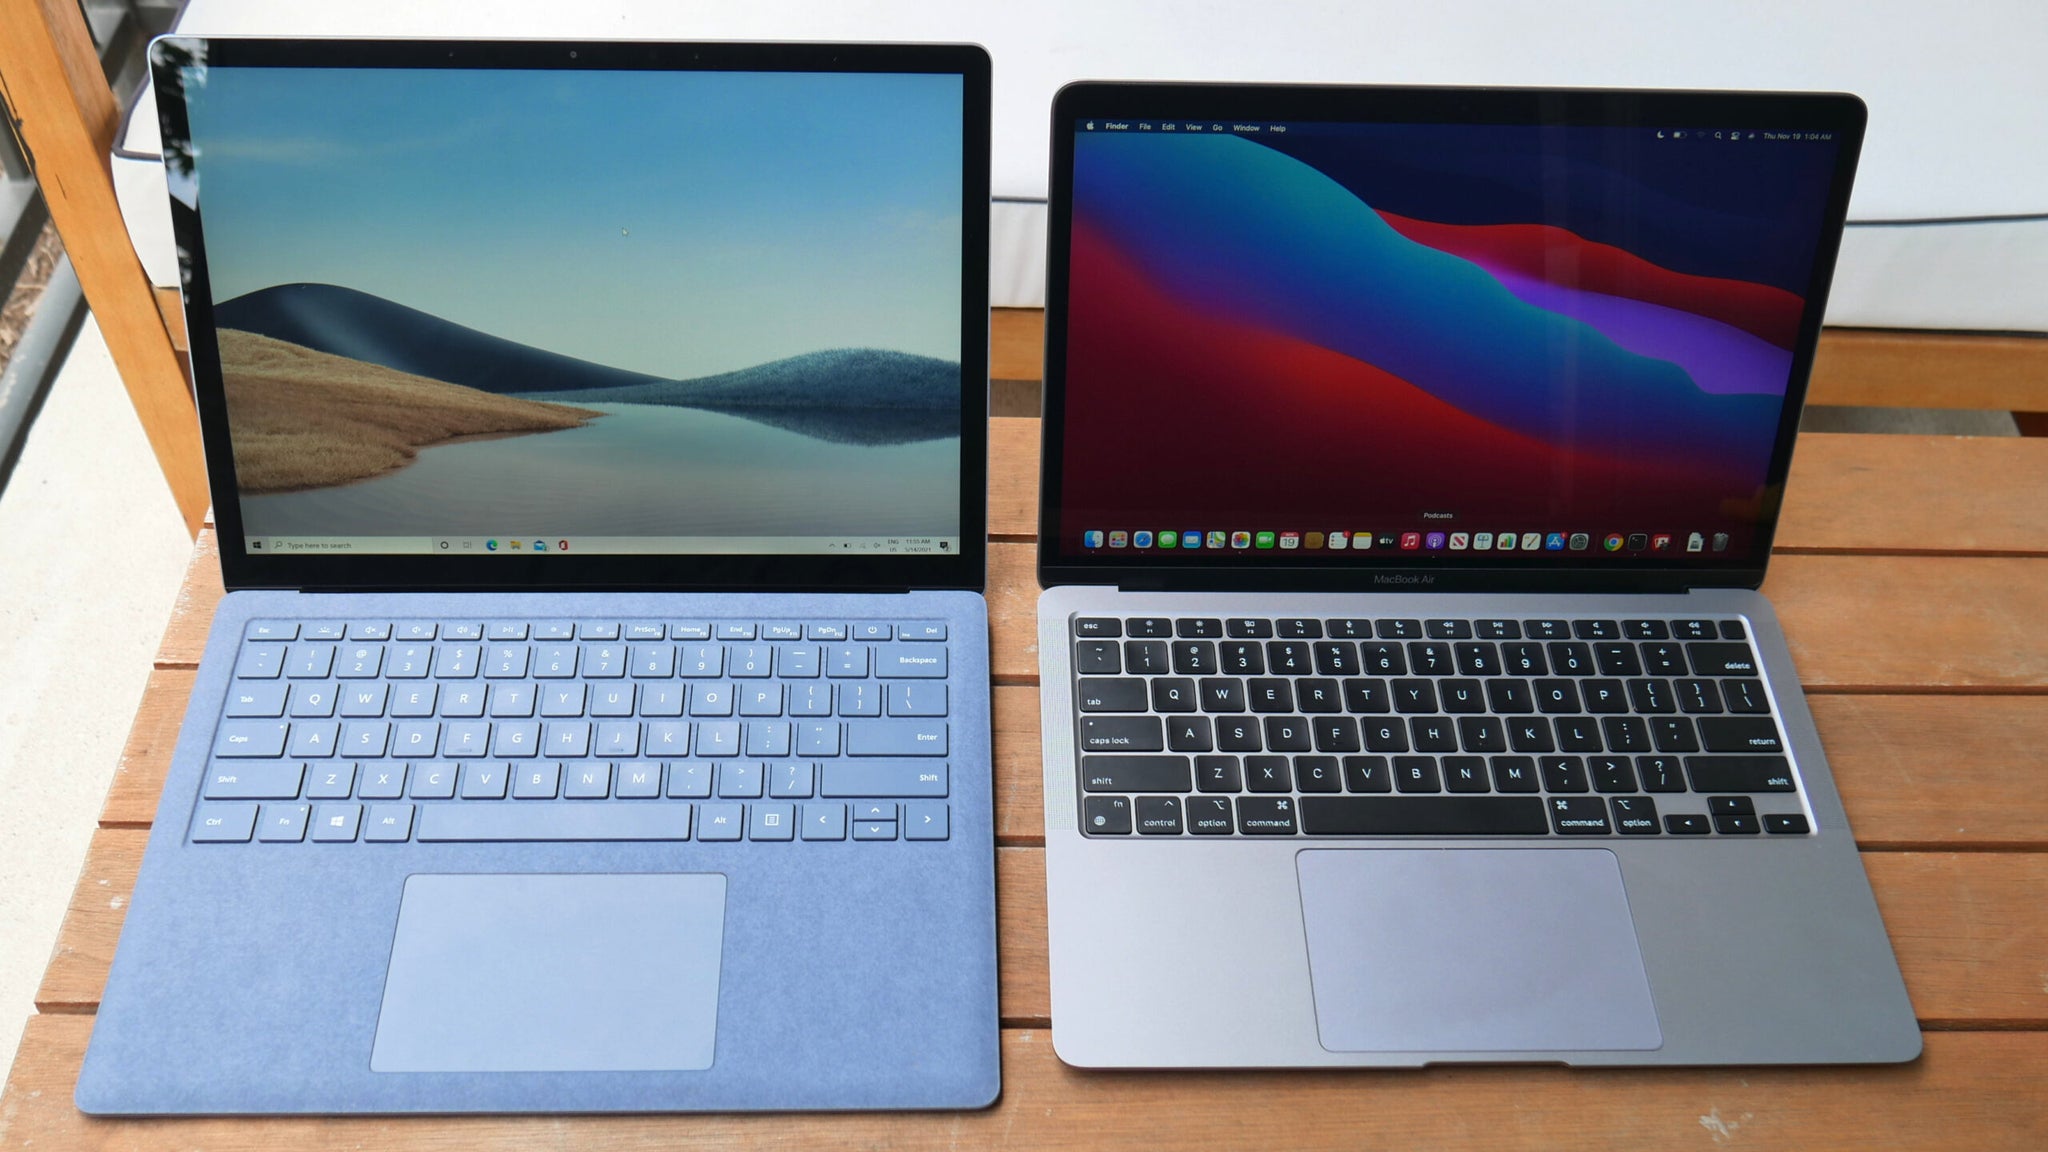 macbook vs microsoft surface laptop: Get to Know Which is Right for You